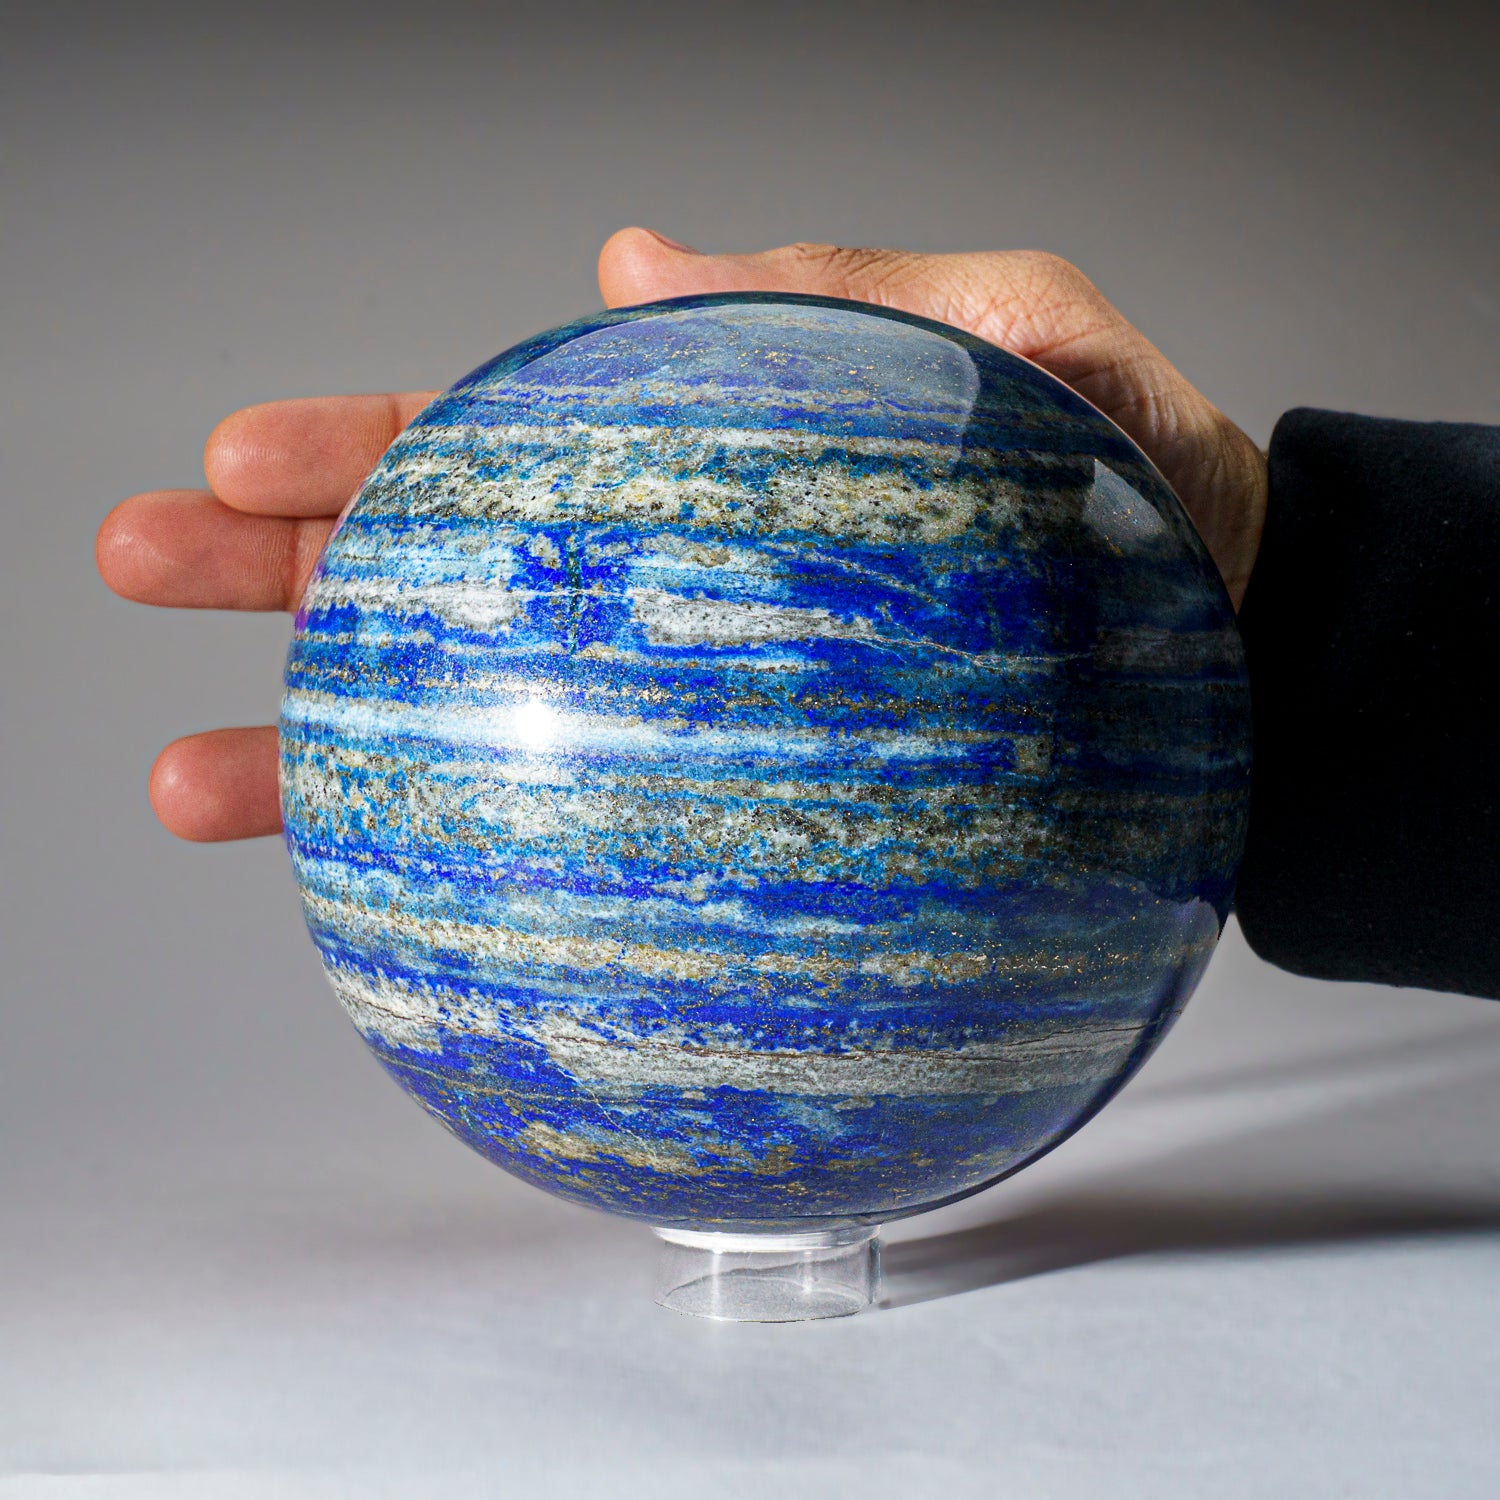 Polished Lapis Lazuli Sphere from Afghanistan (5", 7.7 lbs)